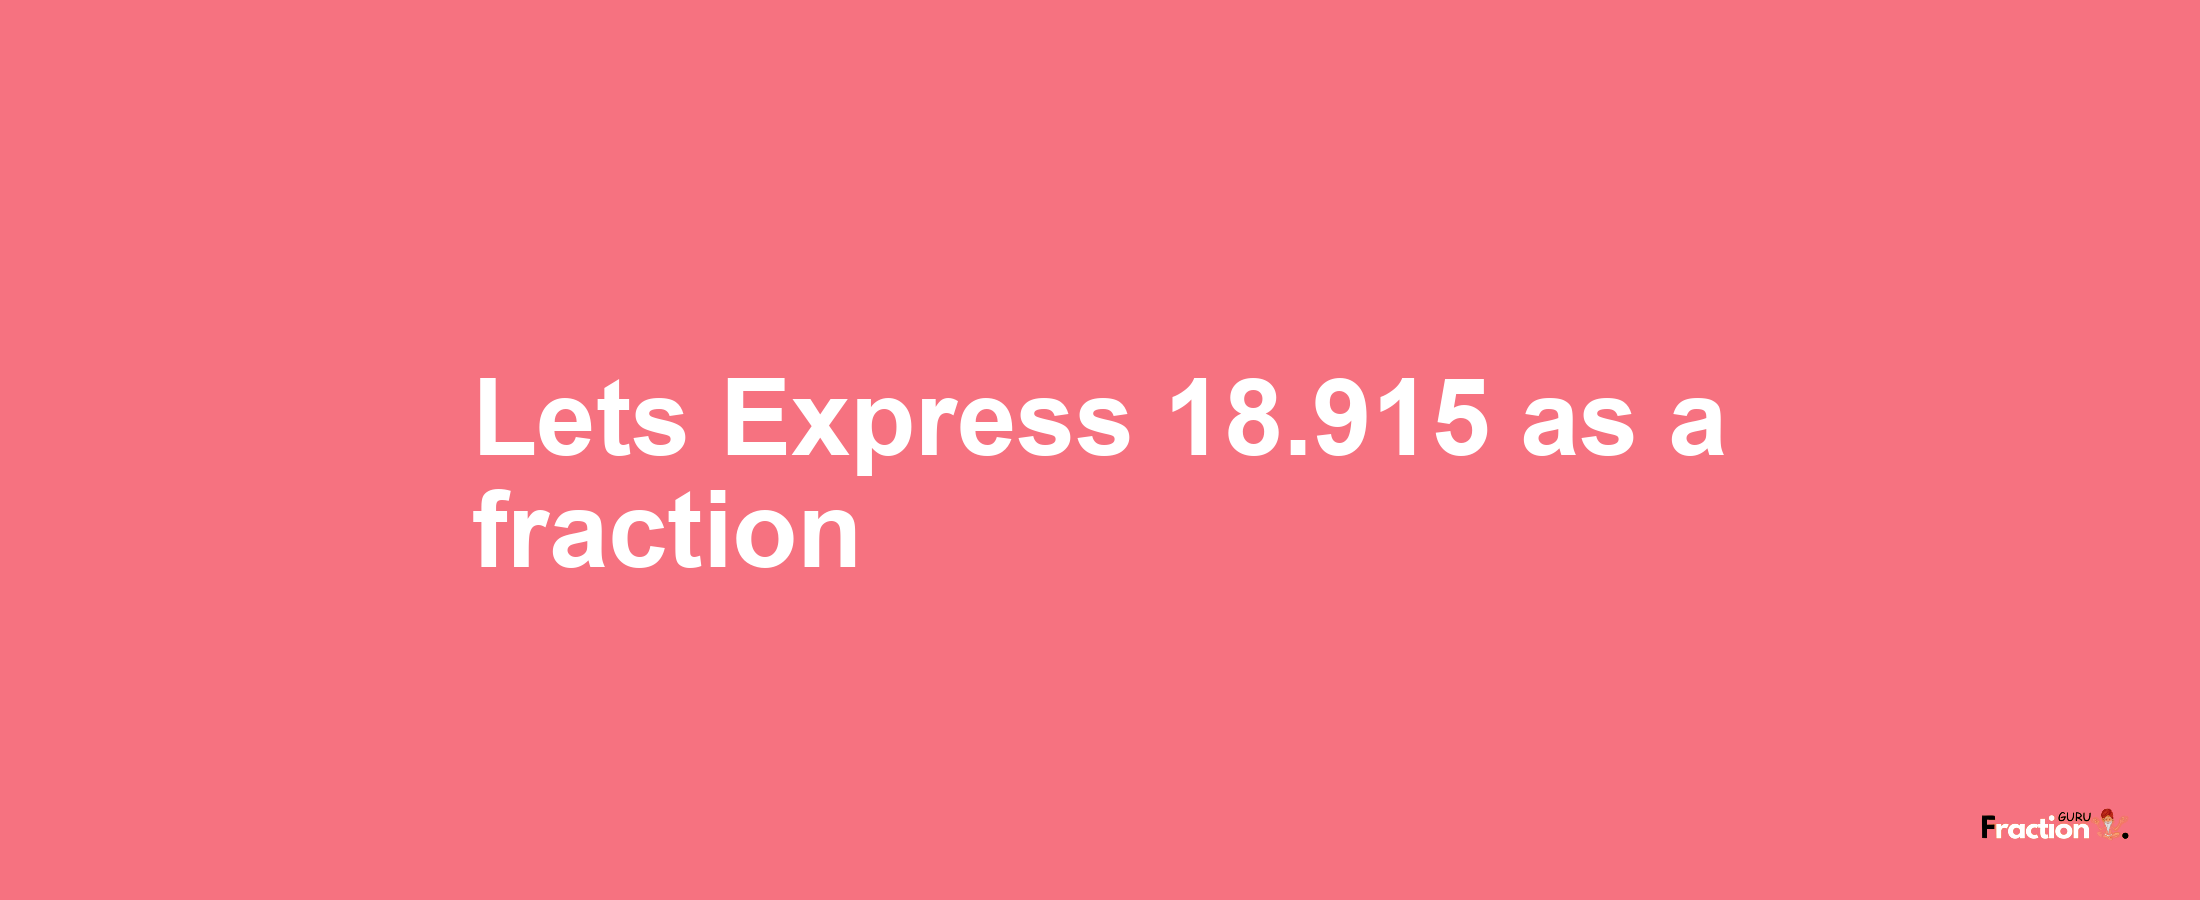 Lets Express 18.915 as afraction